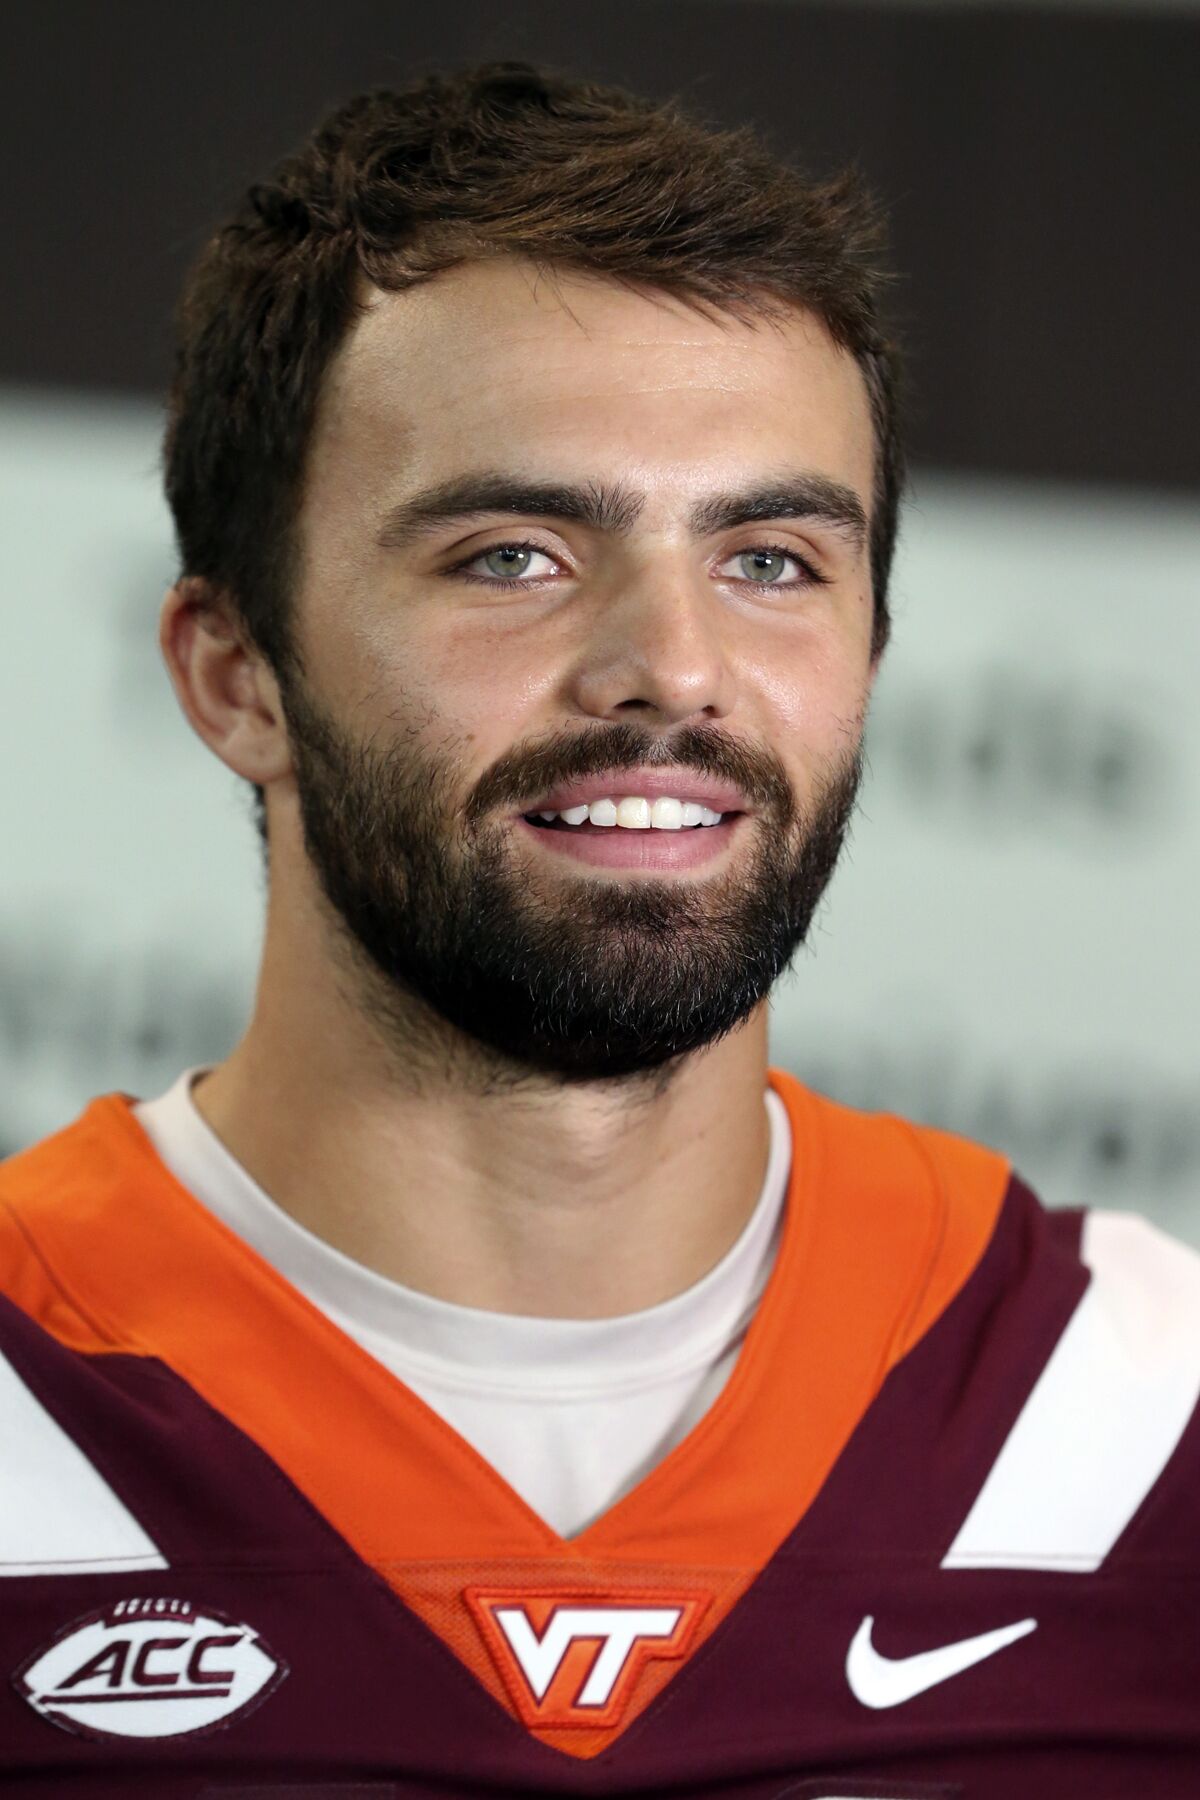 Cole Beck (14) of the Virginia Tech football team during Media Day at the Beamer-Lawson Indoor Practice Facility on Wednesday, Aug. 10 2022, in Blacksburg, Va. (Matt Gentry/The Roanoke Times via AP)